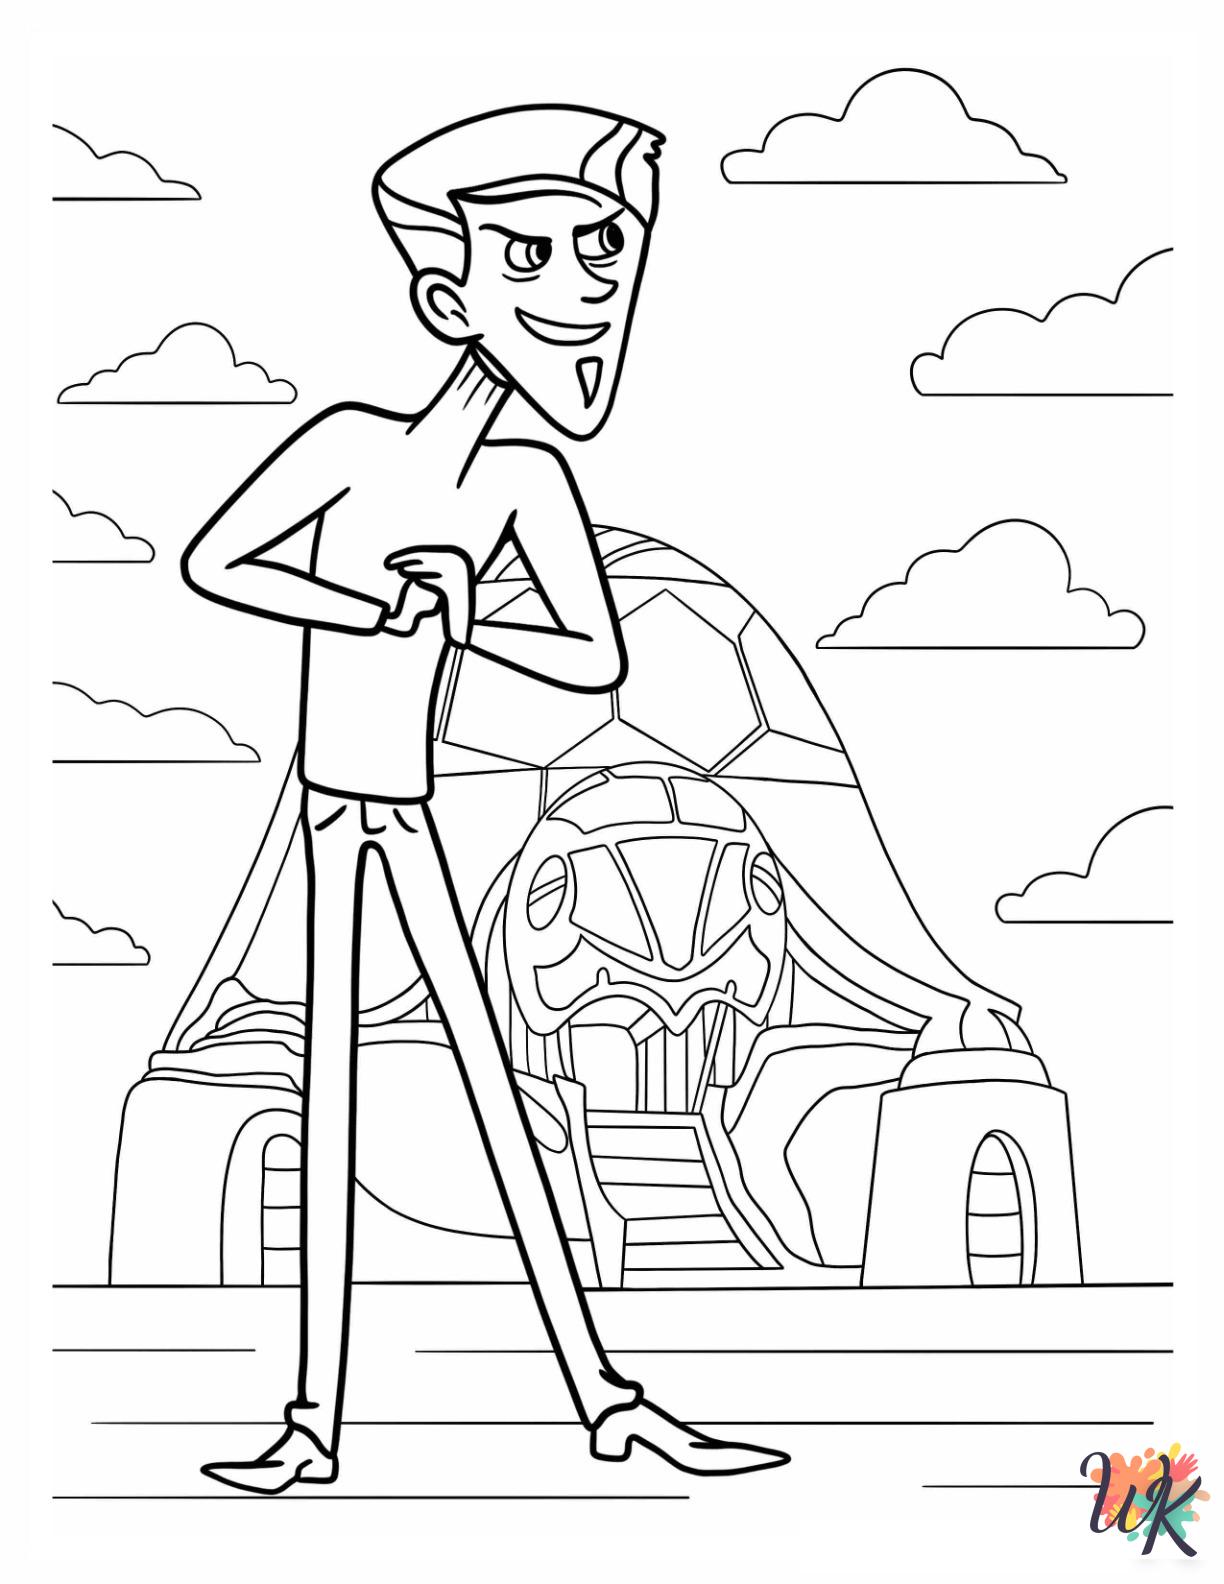 Wild Kratts coloring pages for adults easy